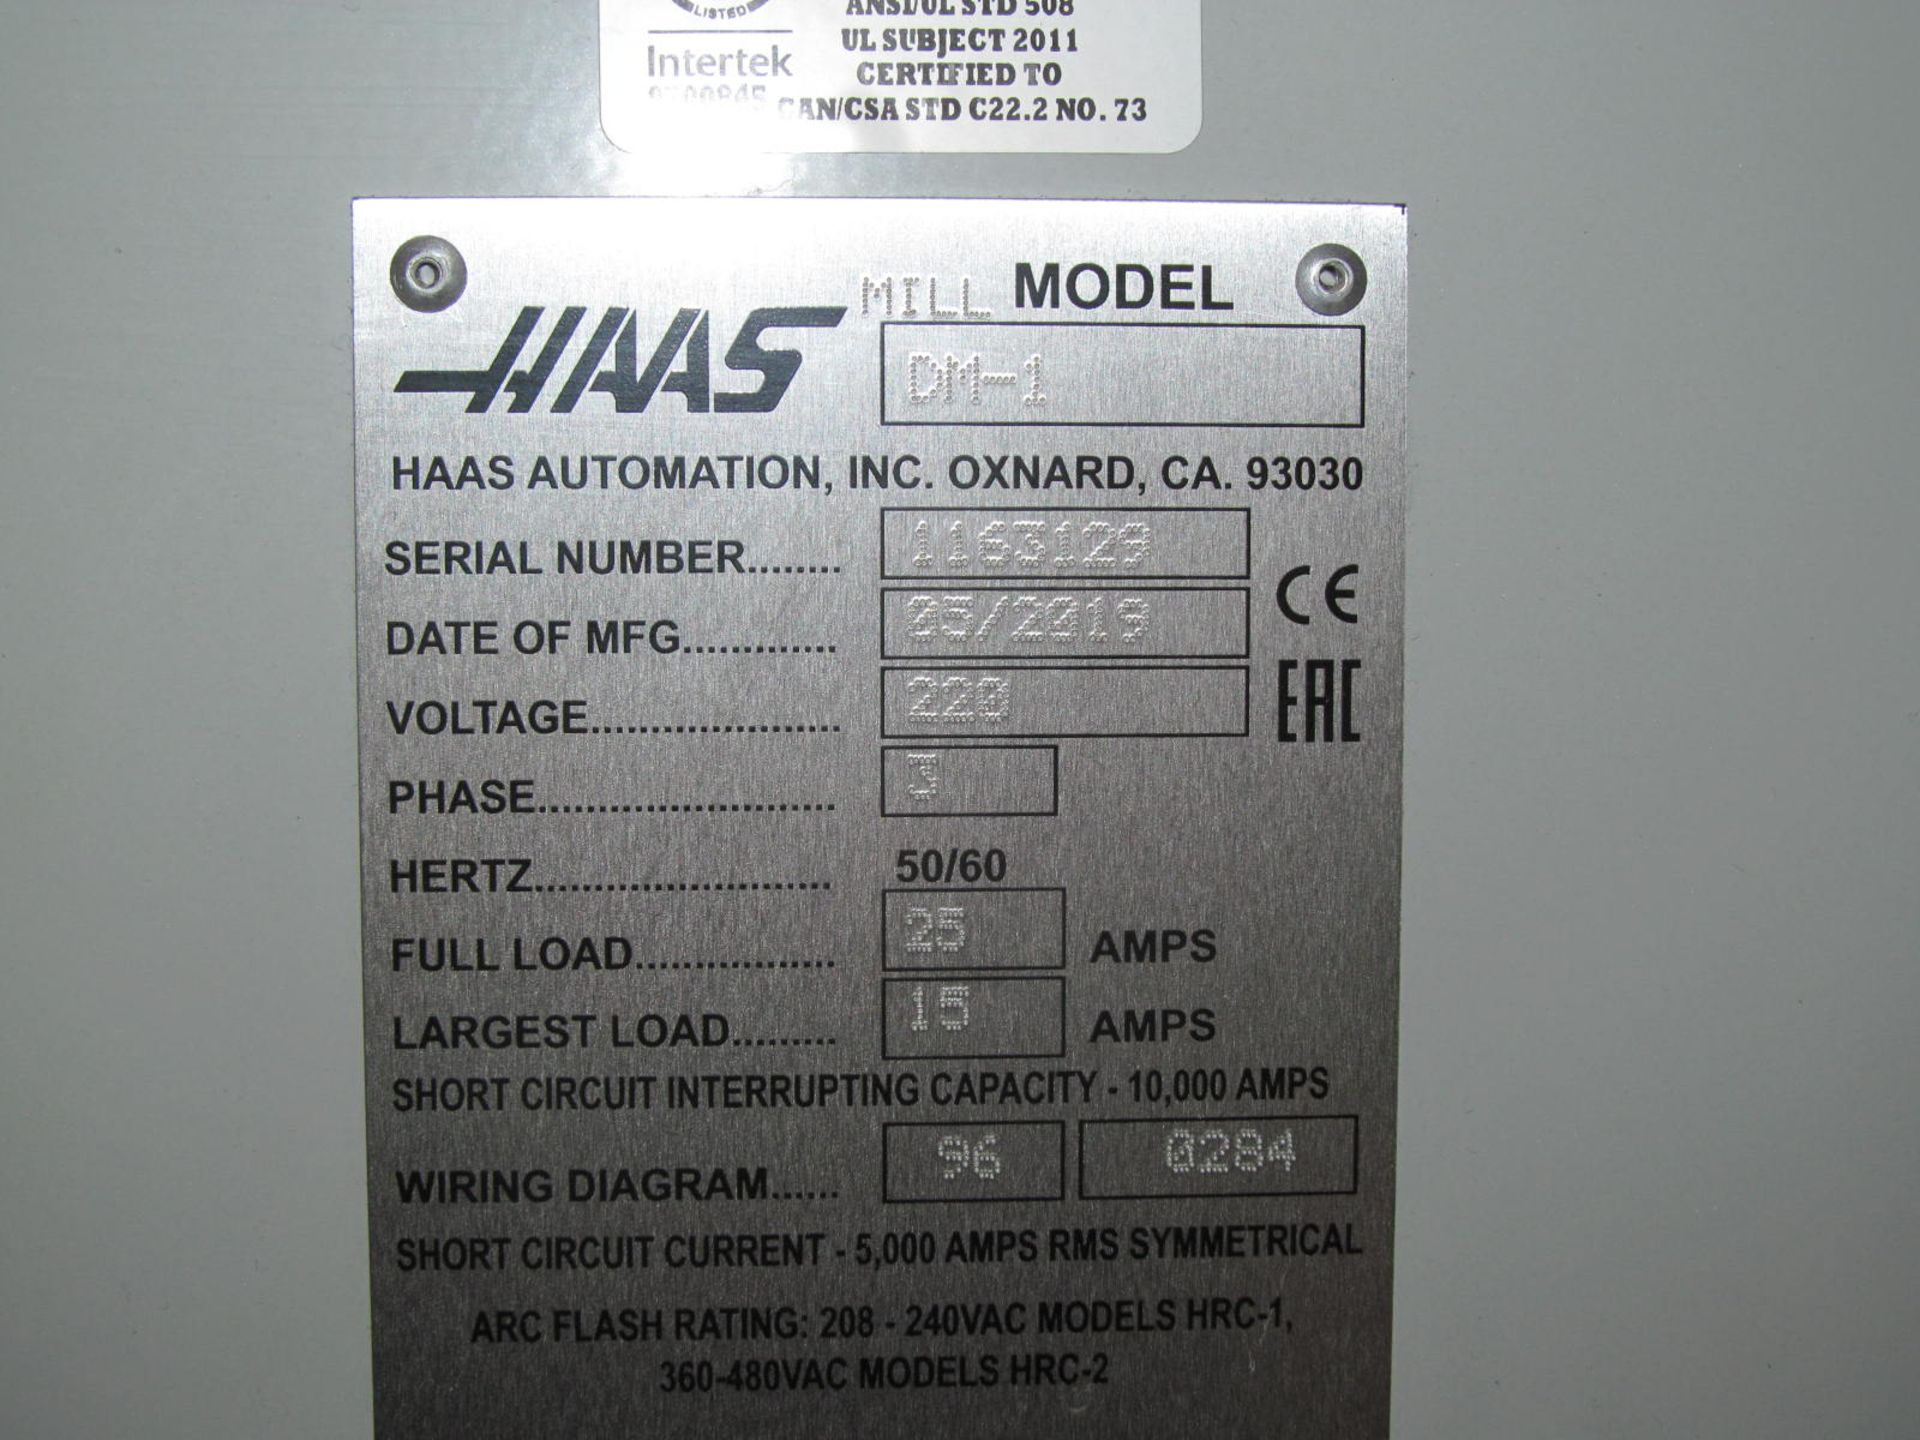 Haas DM-1 High-Performance CNC Drill/Mill Center - Image 7 of 7